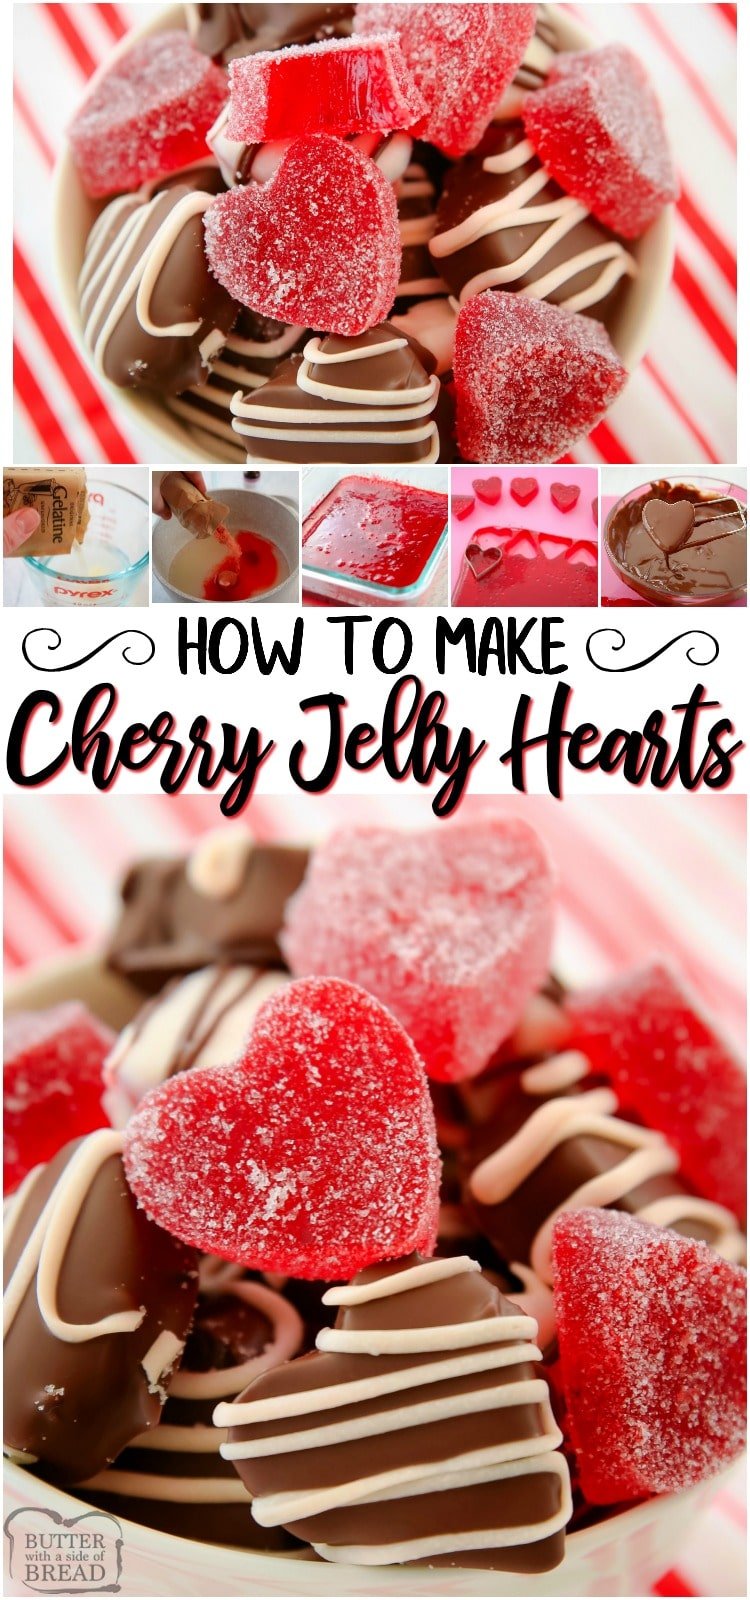 Cherry Jelly Hearts recipe for a fun & tasty take on popular jelly heart candy! Jelly Candy covered in white or dark chocolate or sugar. Cute for Valentine's Day or anytime.